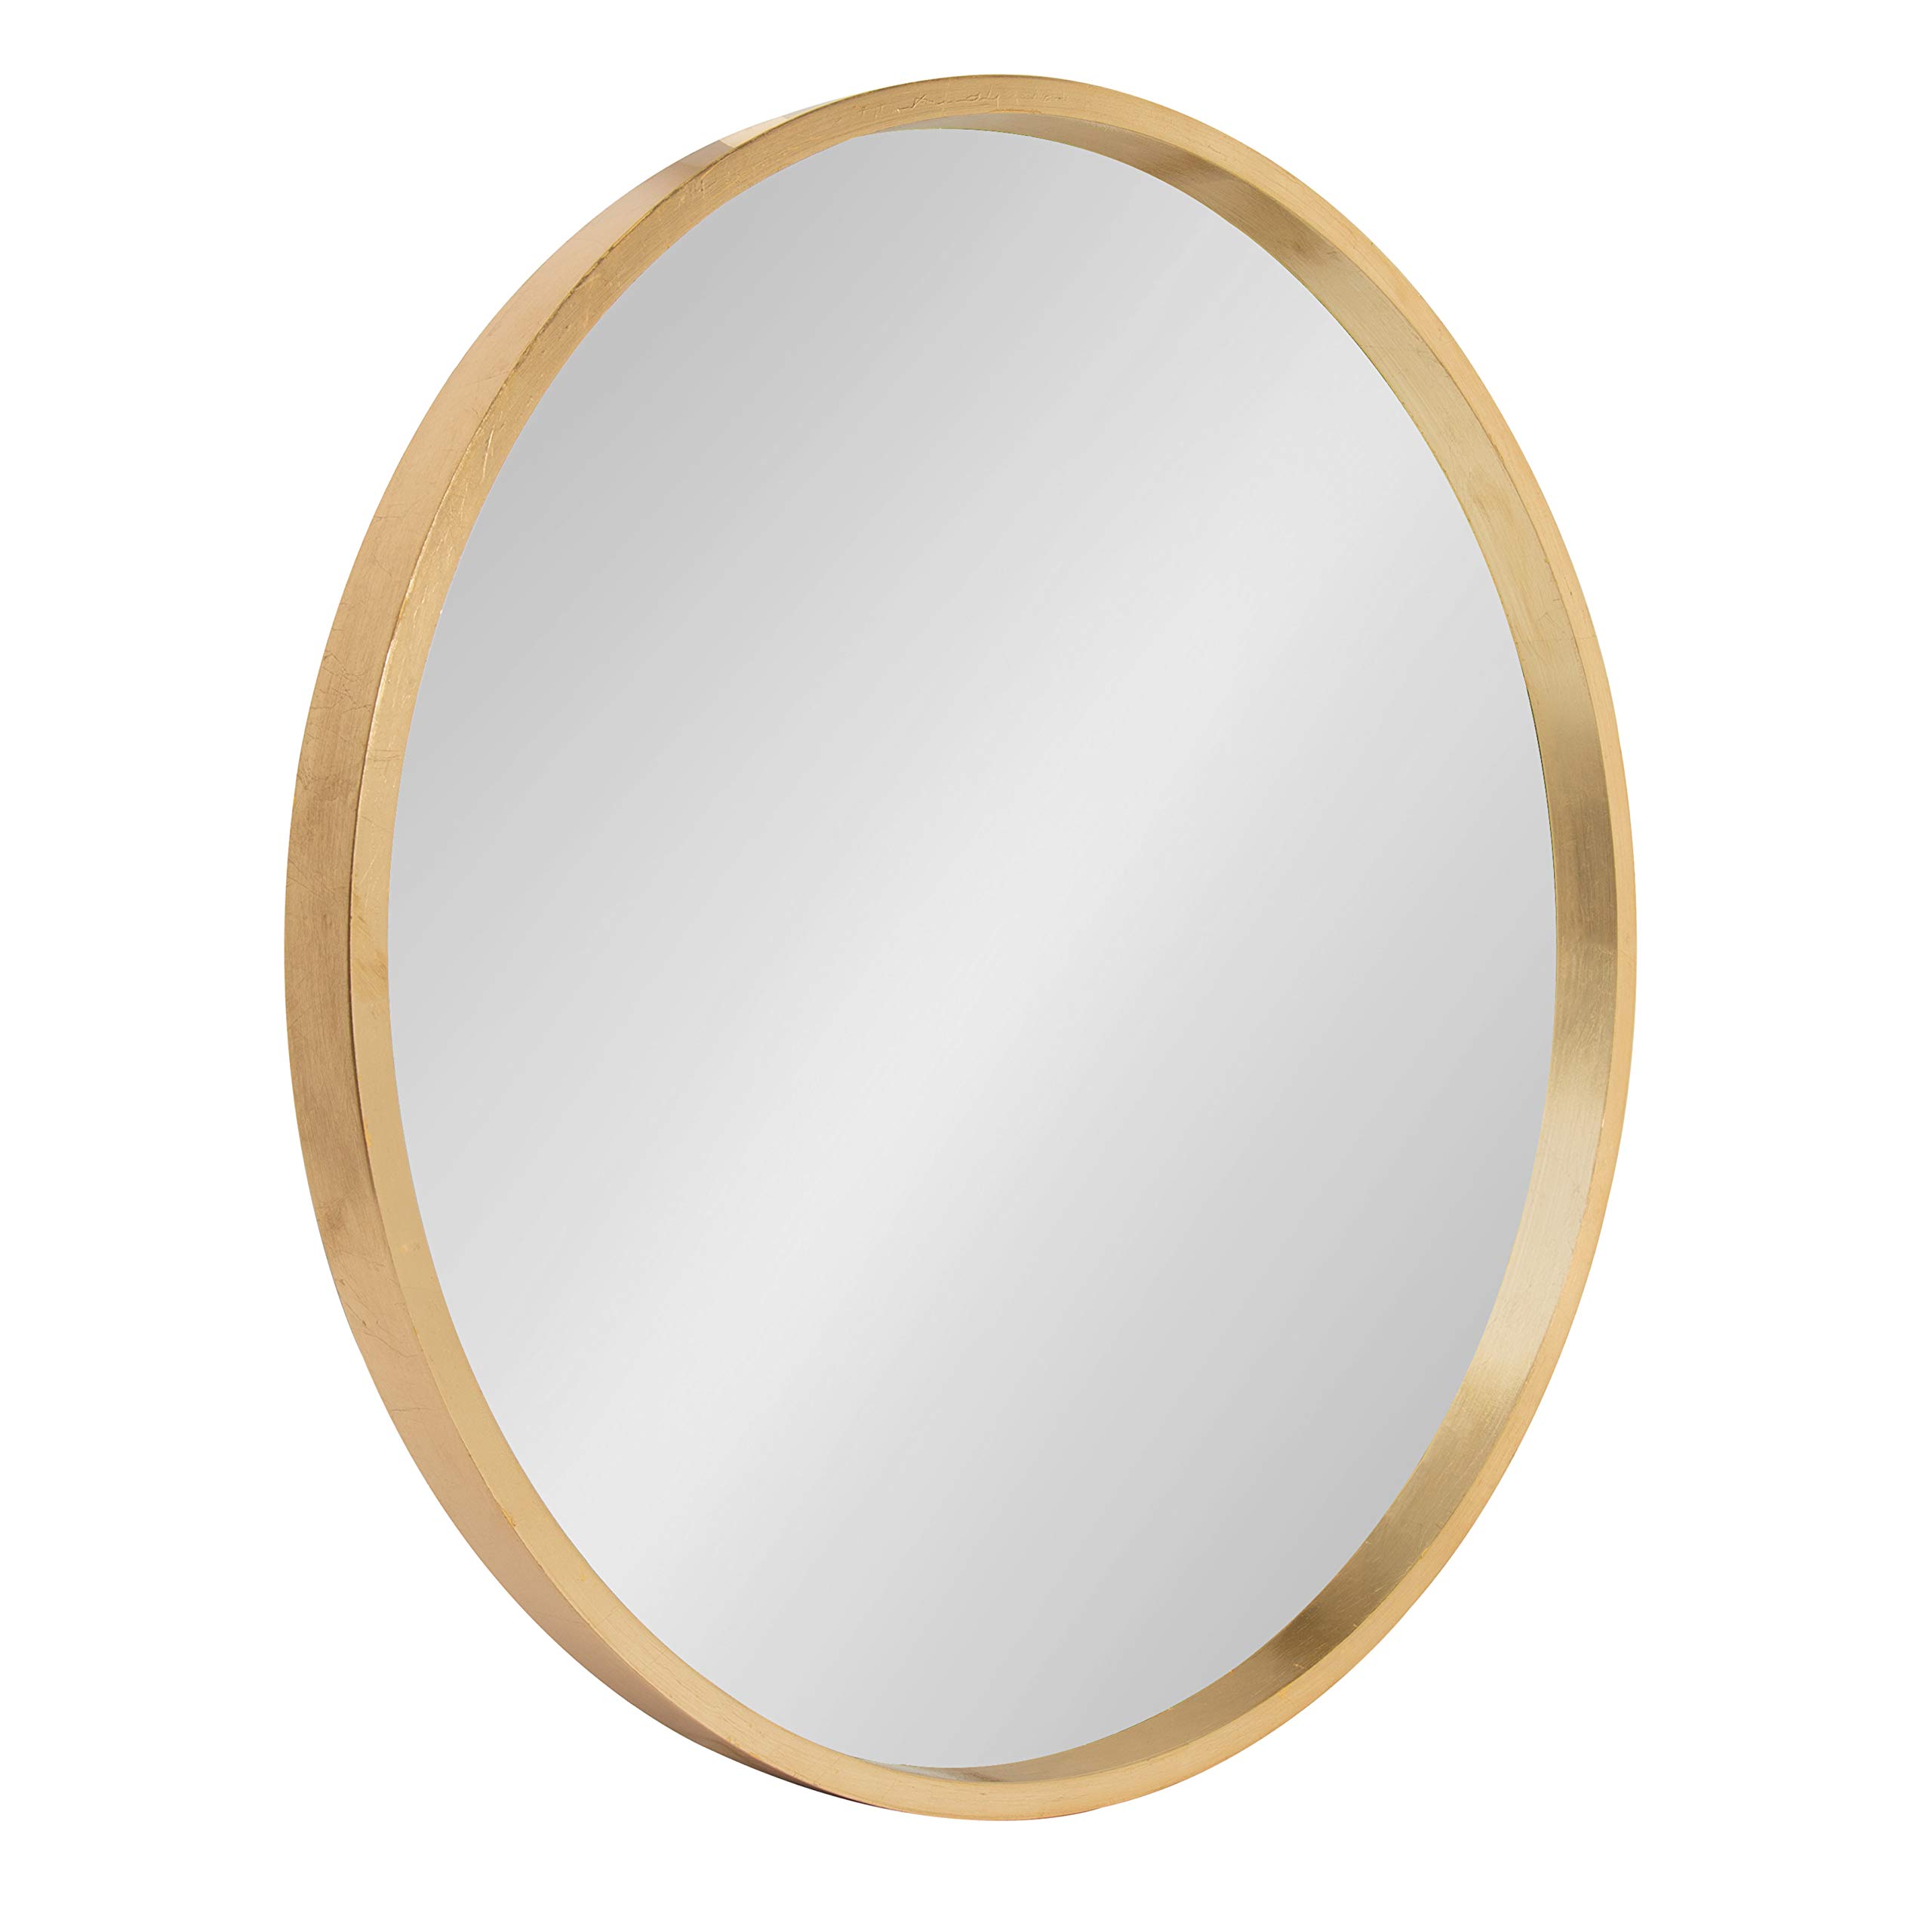 Kate and Laurel Travis Round Wood Wall Mirror, 21.6" Diameter, Gold, Modern Glam Wall Décor Accent